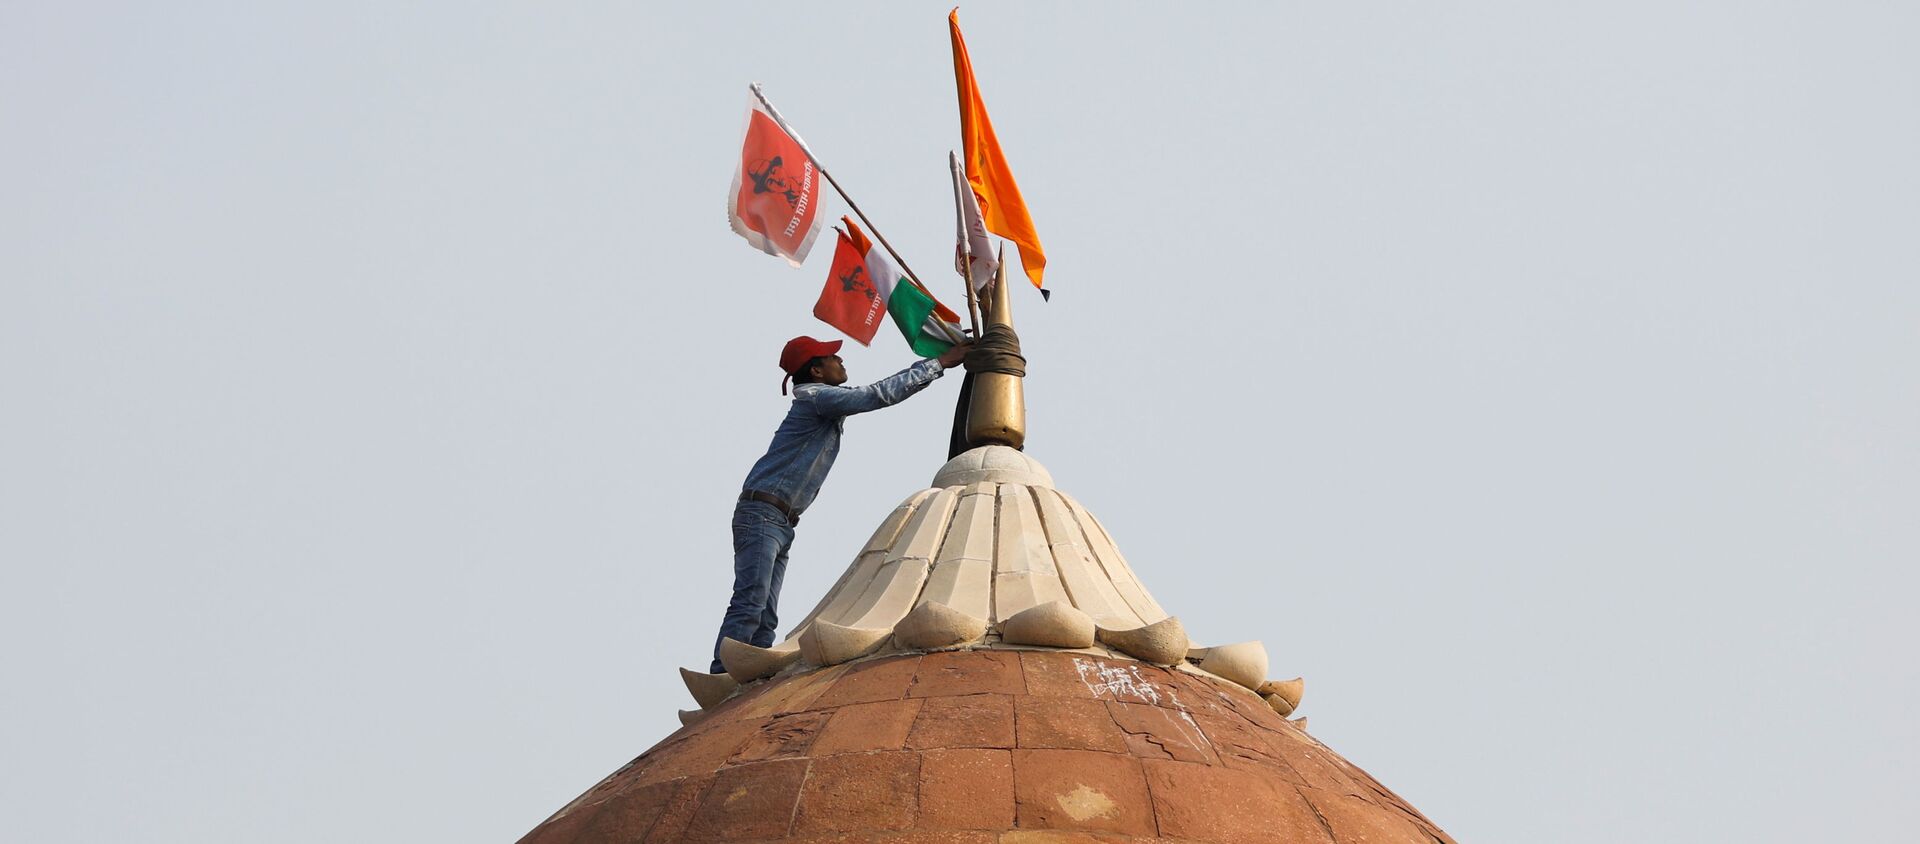 A man holds a flag as he stands on the top of the historic Red Fort during a protest against farm laws introduced by the government, in Delhi - Sputnik International, 1920, 31.01.2021